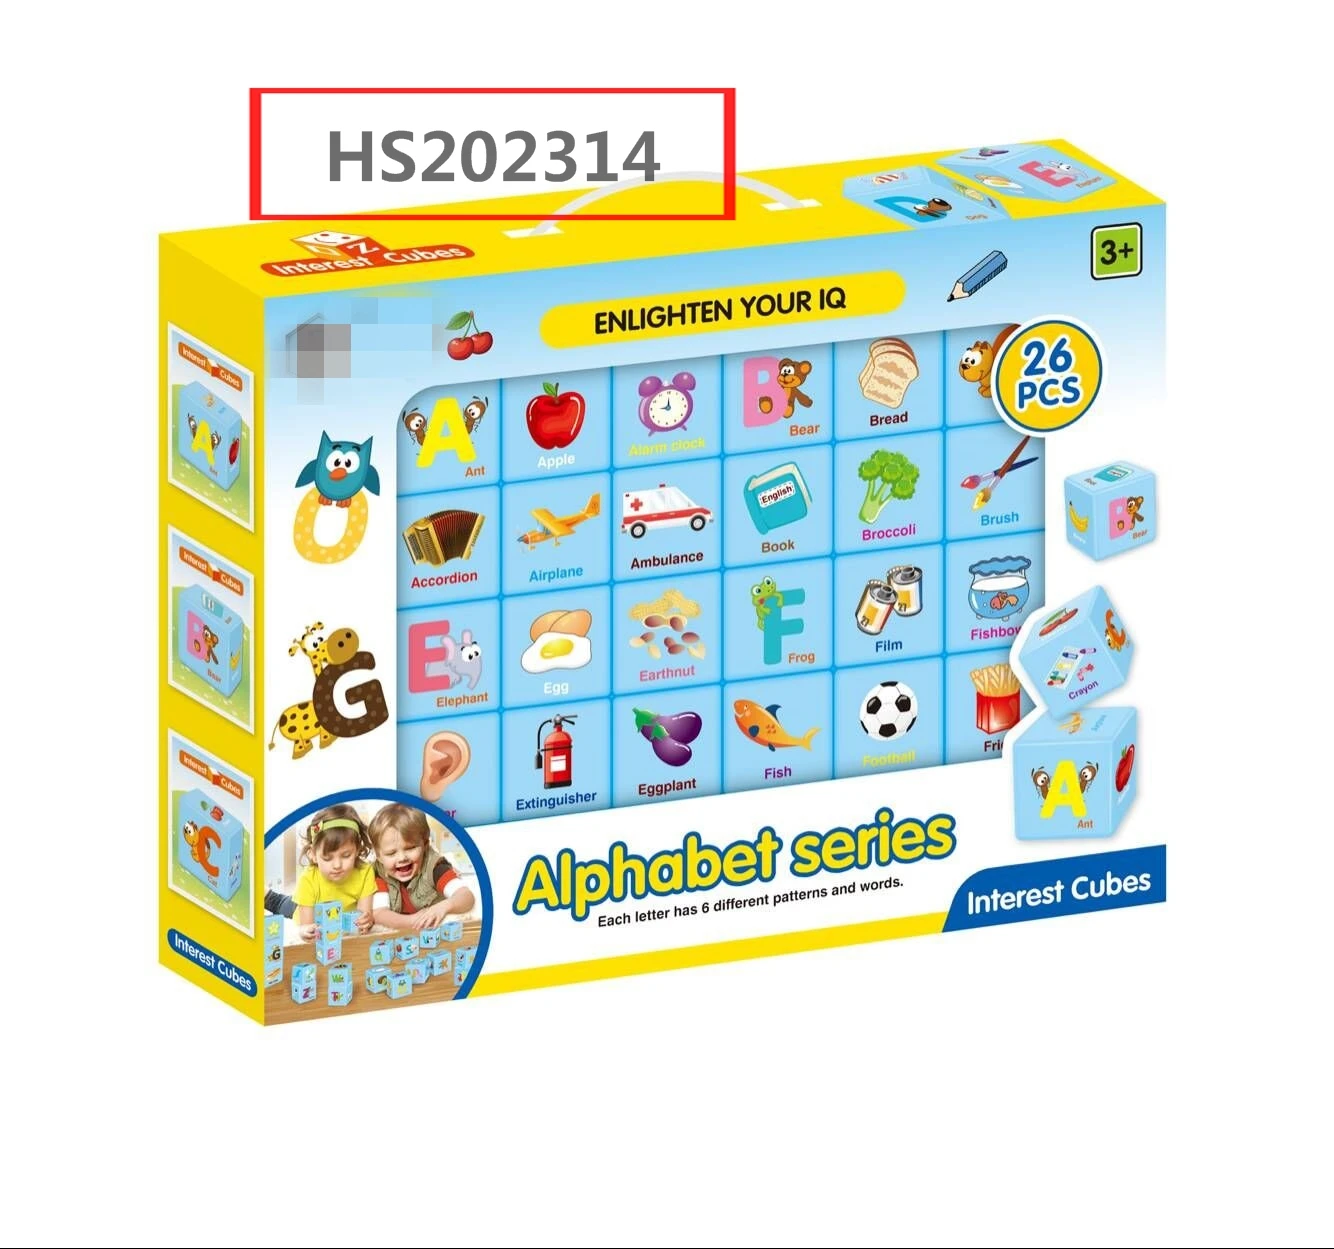 HS202314, Huwsin Toys, Educational toy, Magnetic magic cube,magneticbuilding block,magneticpuzzle,26pcs